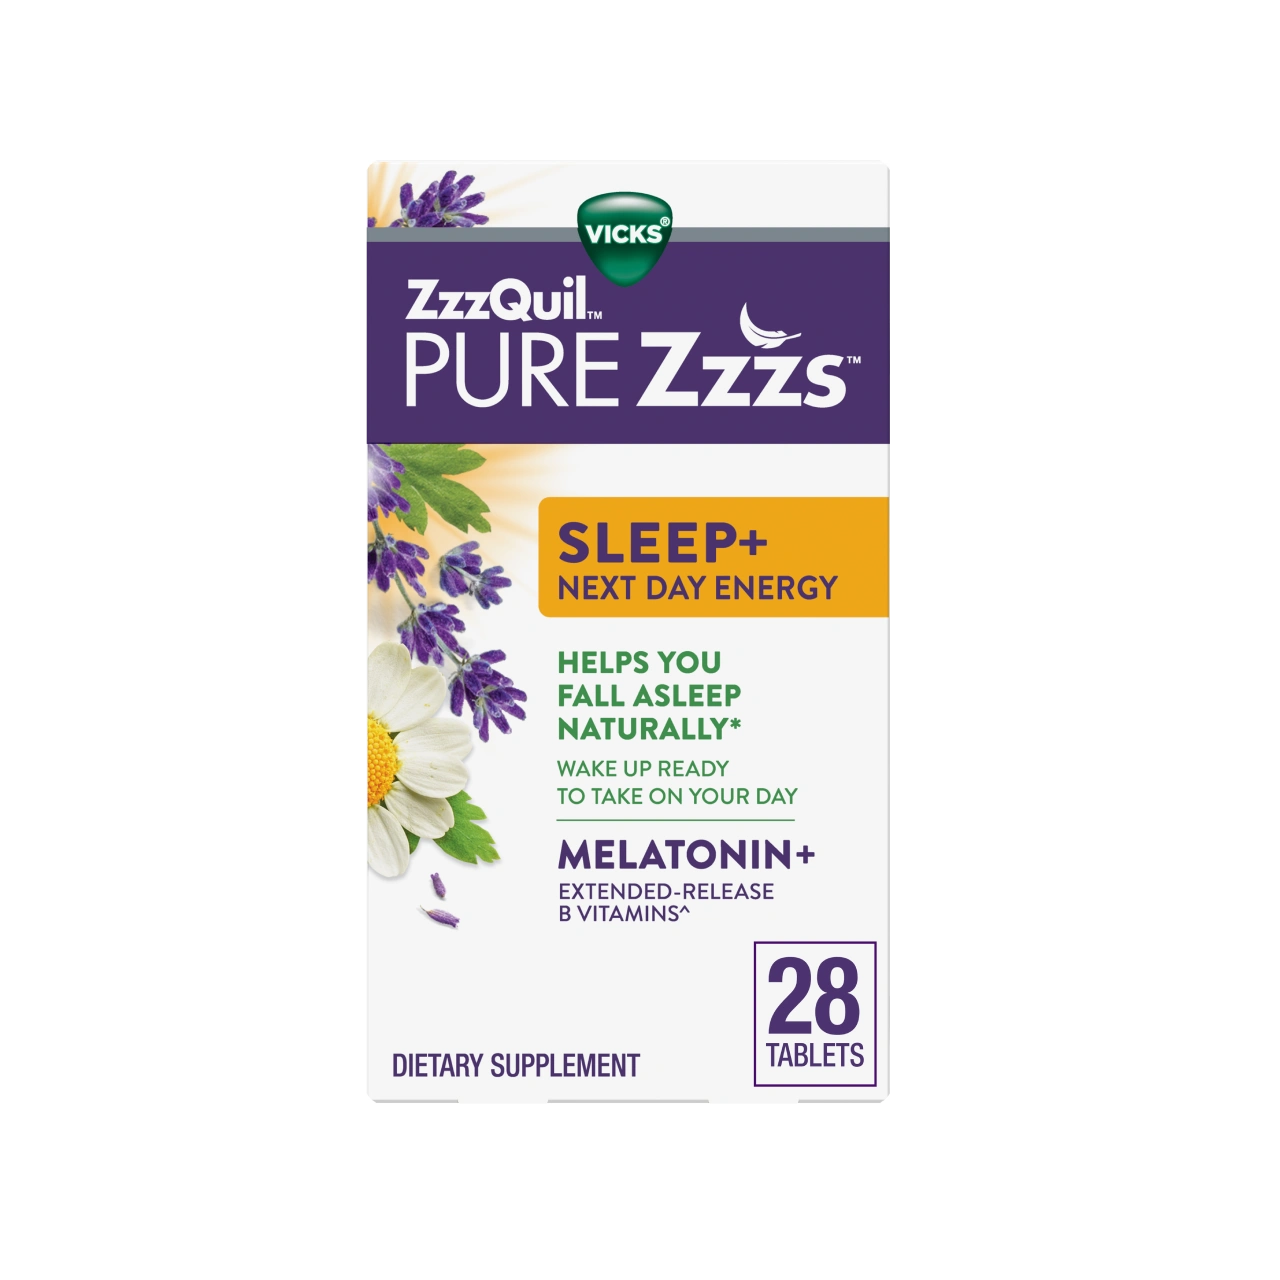 Vicks ZzzQuil PURE Zzzs Sleep+ Next Day Energy Tablets